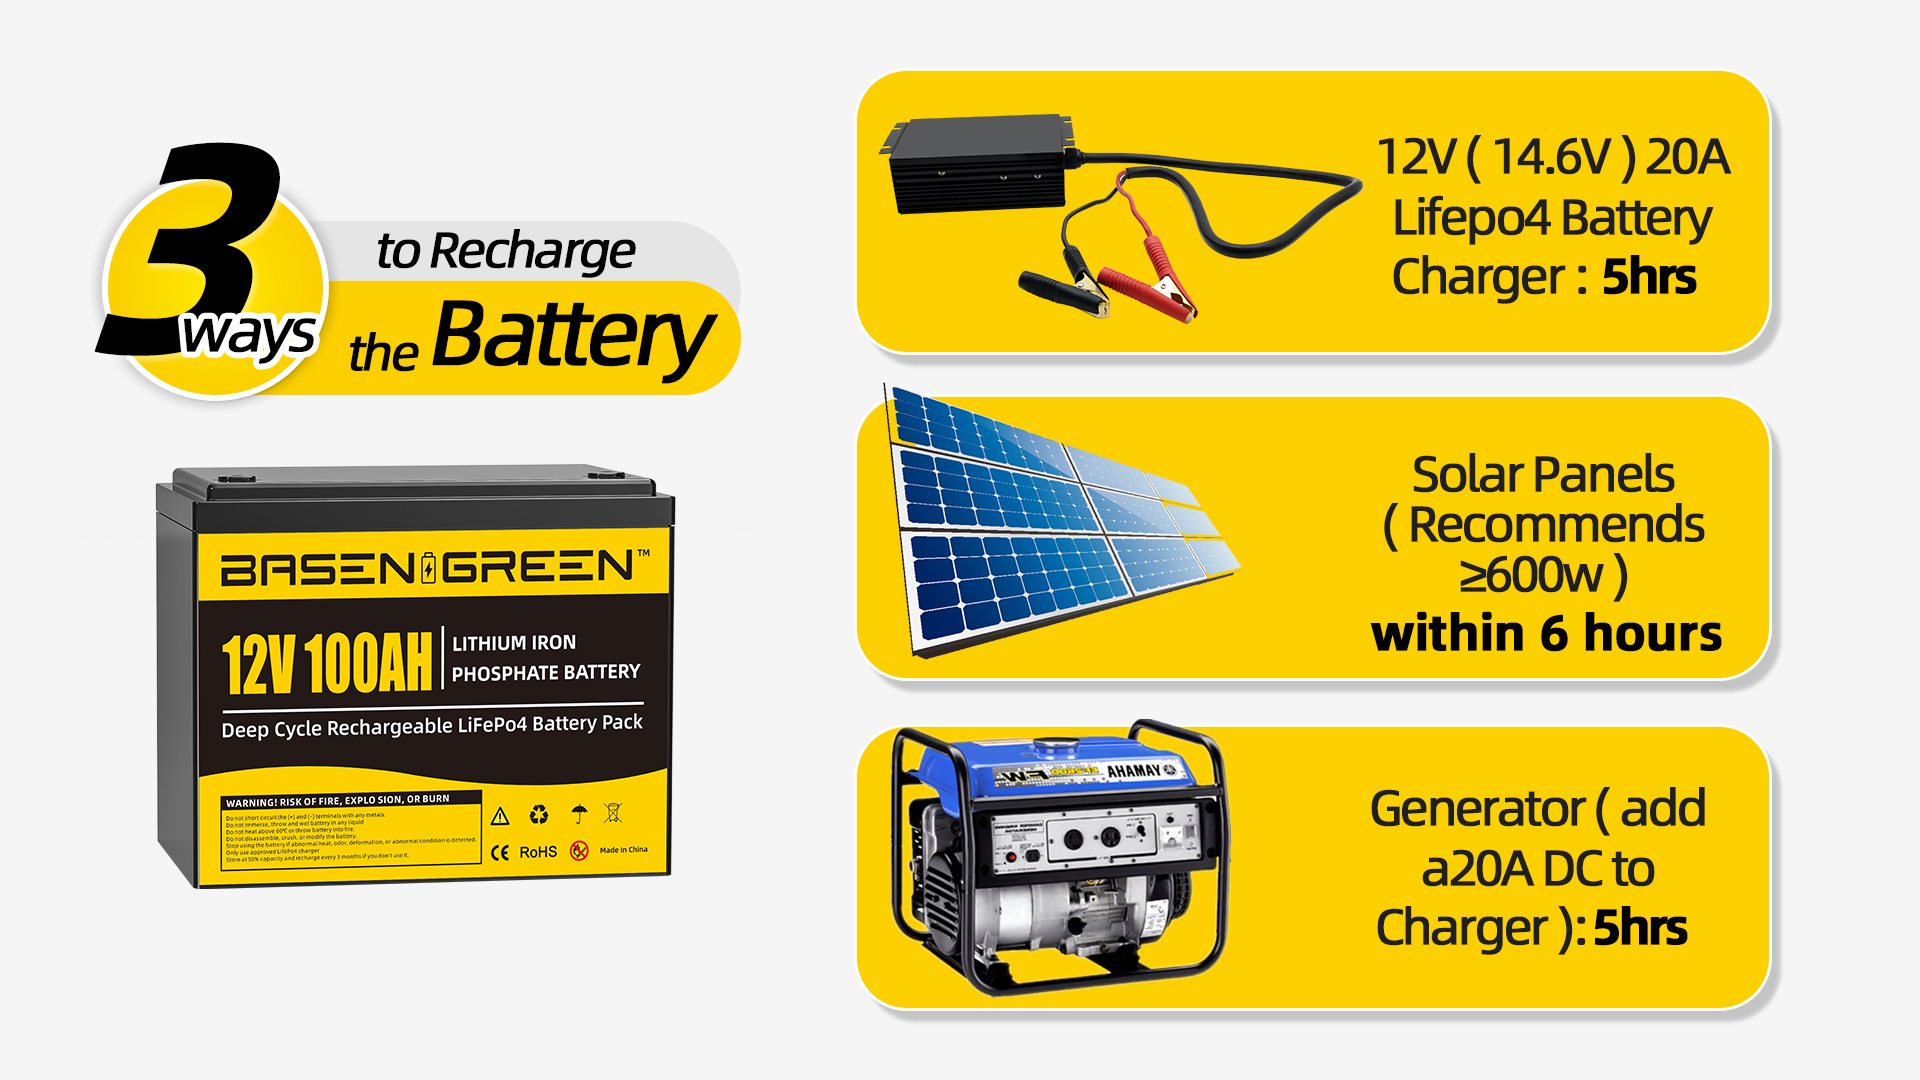 How to Charge LiFePO4 Battery?